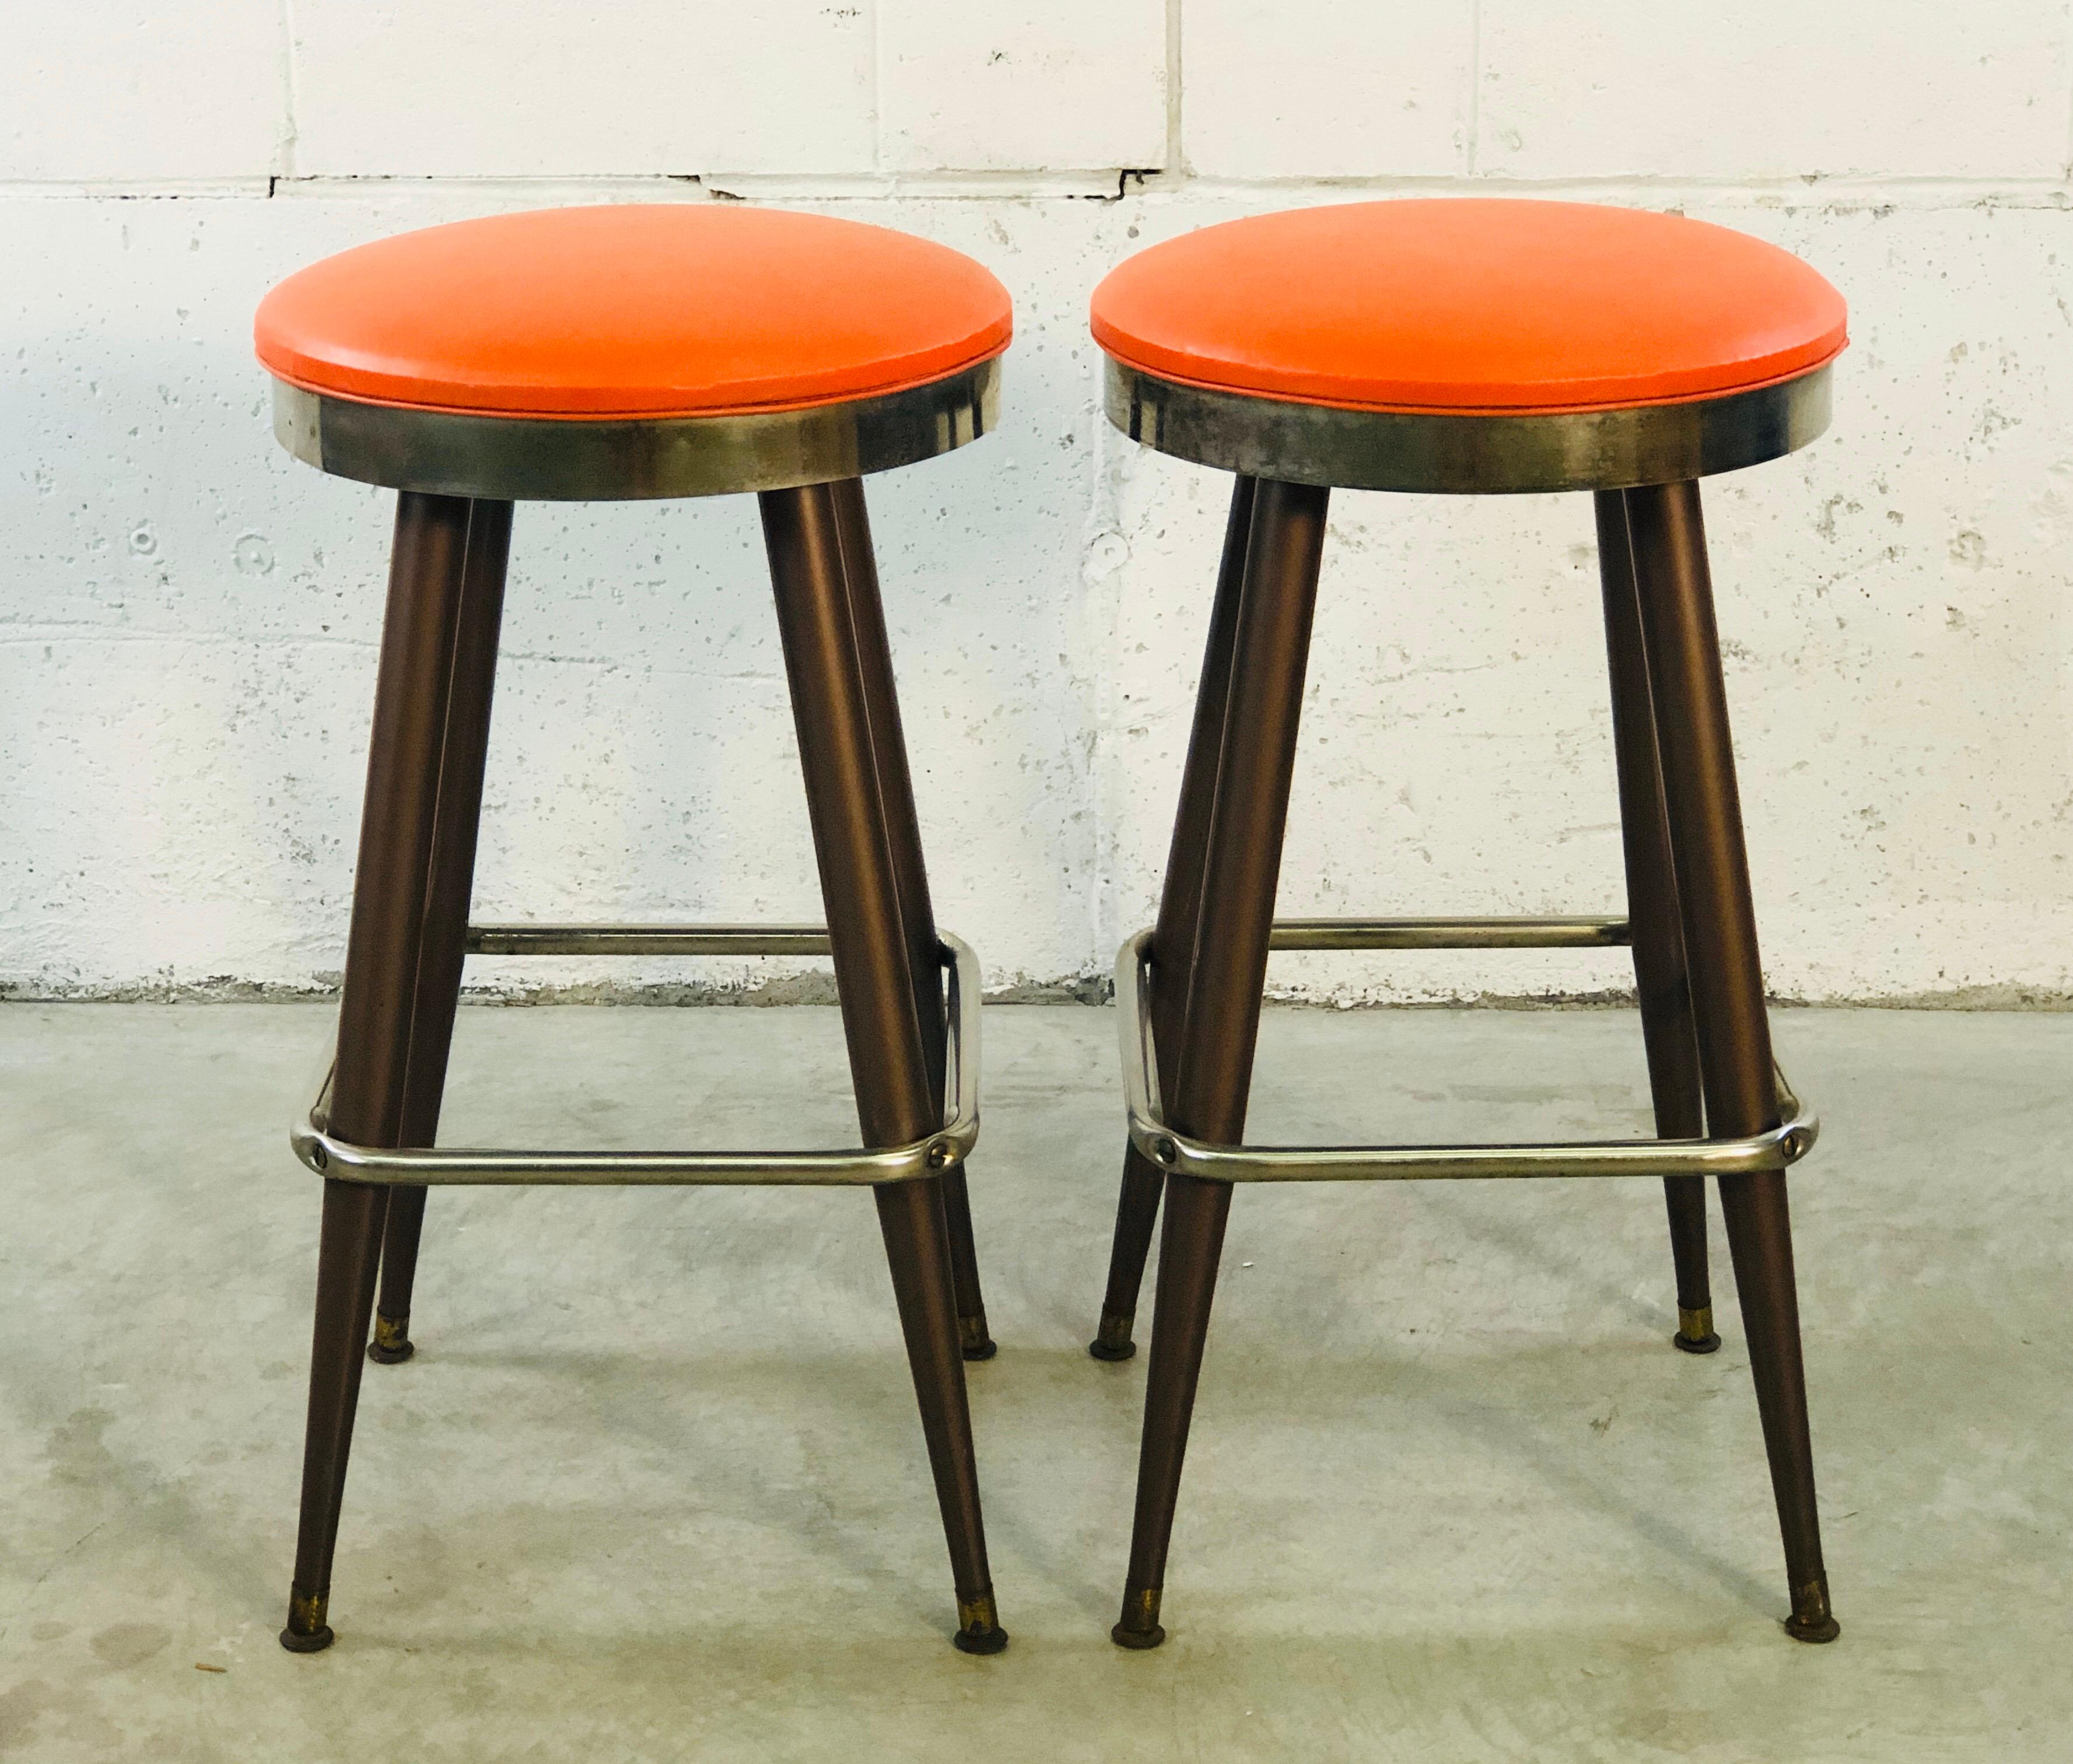 Vintage 1960s pair of orange vinyl bar stools with metal bases. The vinyl tops are round and the bases are square. Marked and dated underneath. Foot rests are 11.25” H.